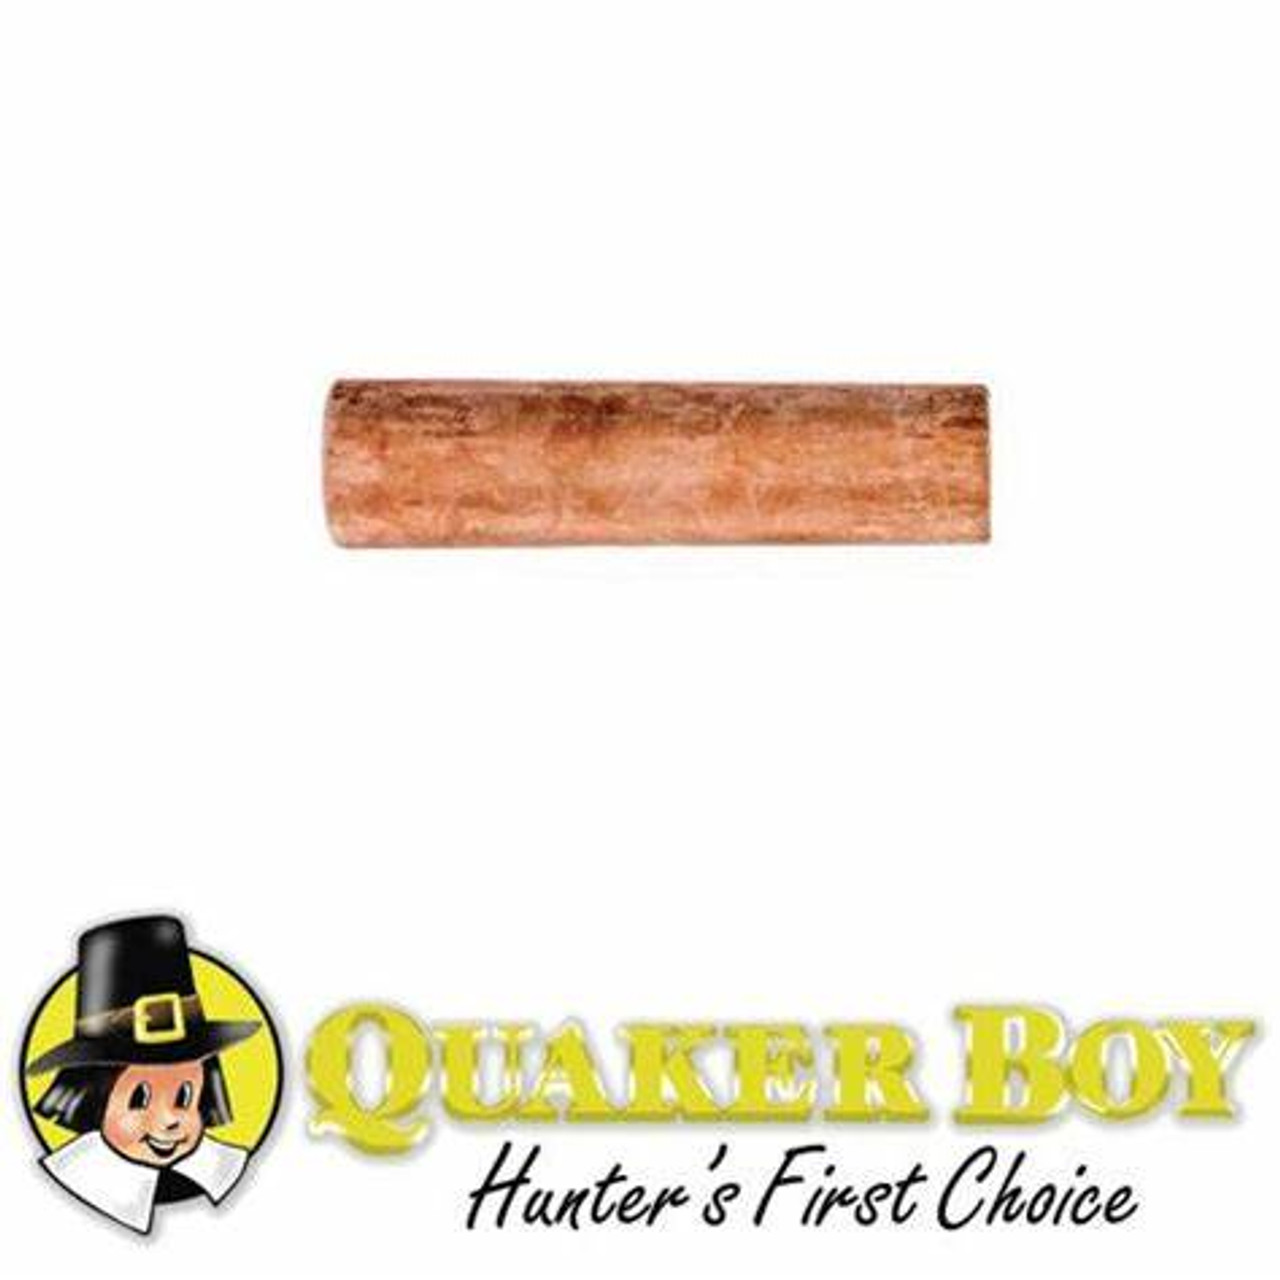 This is a premium, greaseless chalk that will put new life into your box or push pull calls.